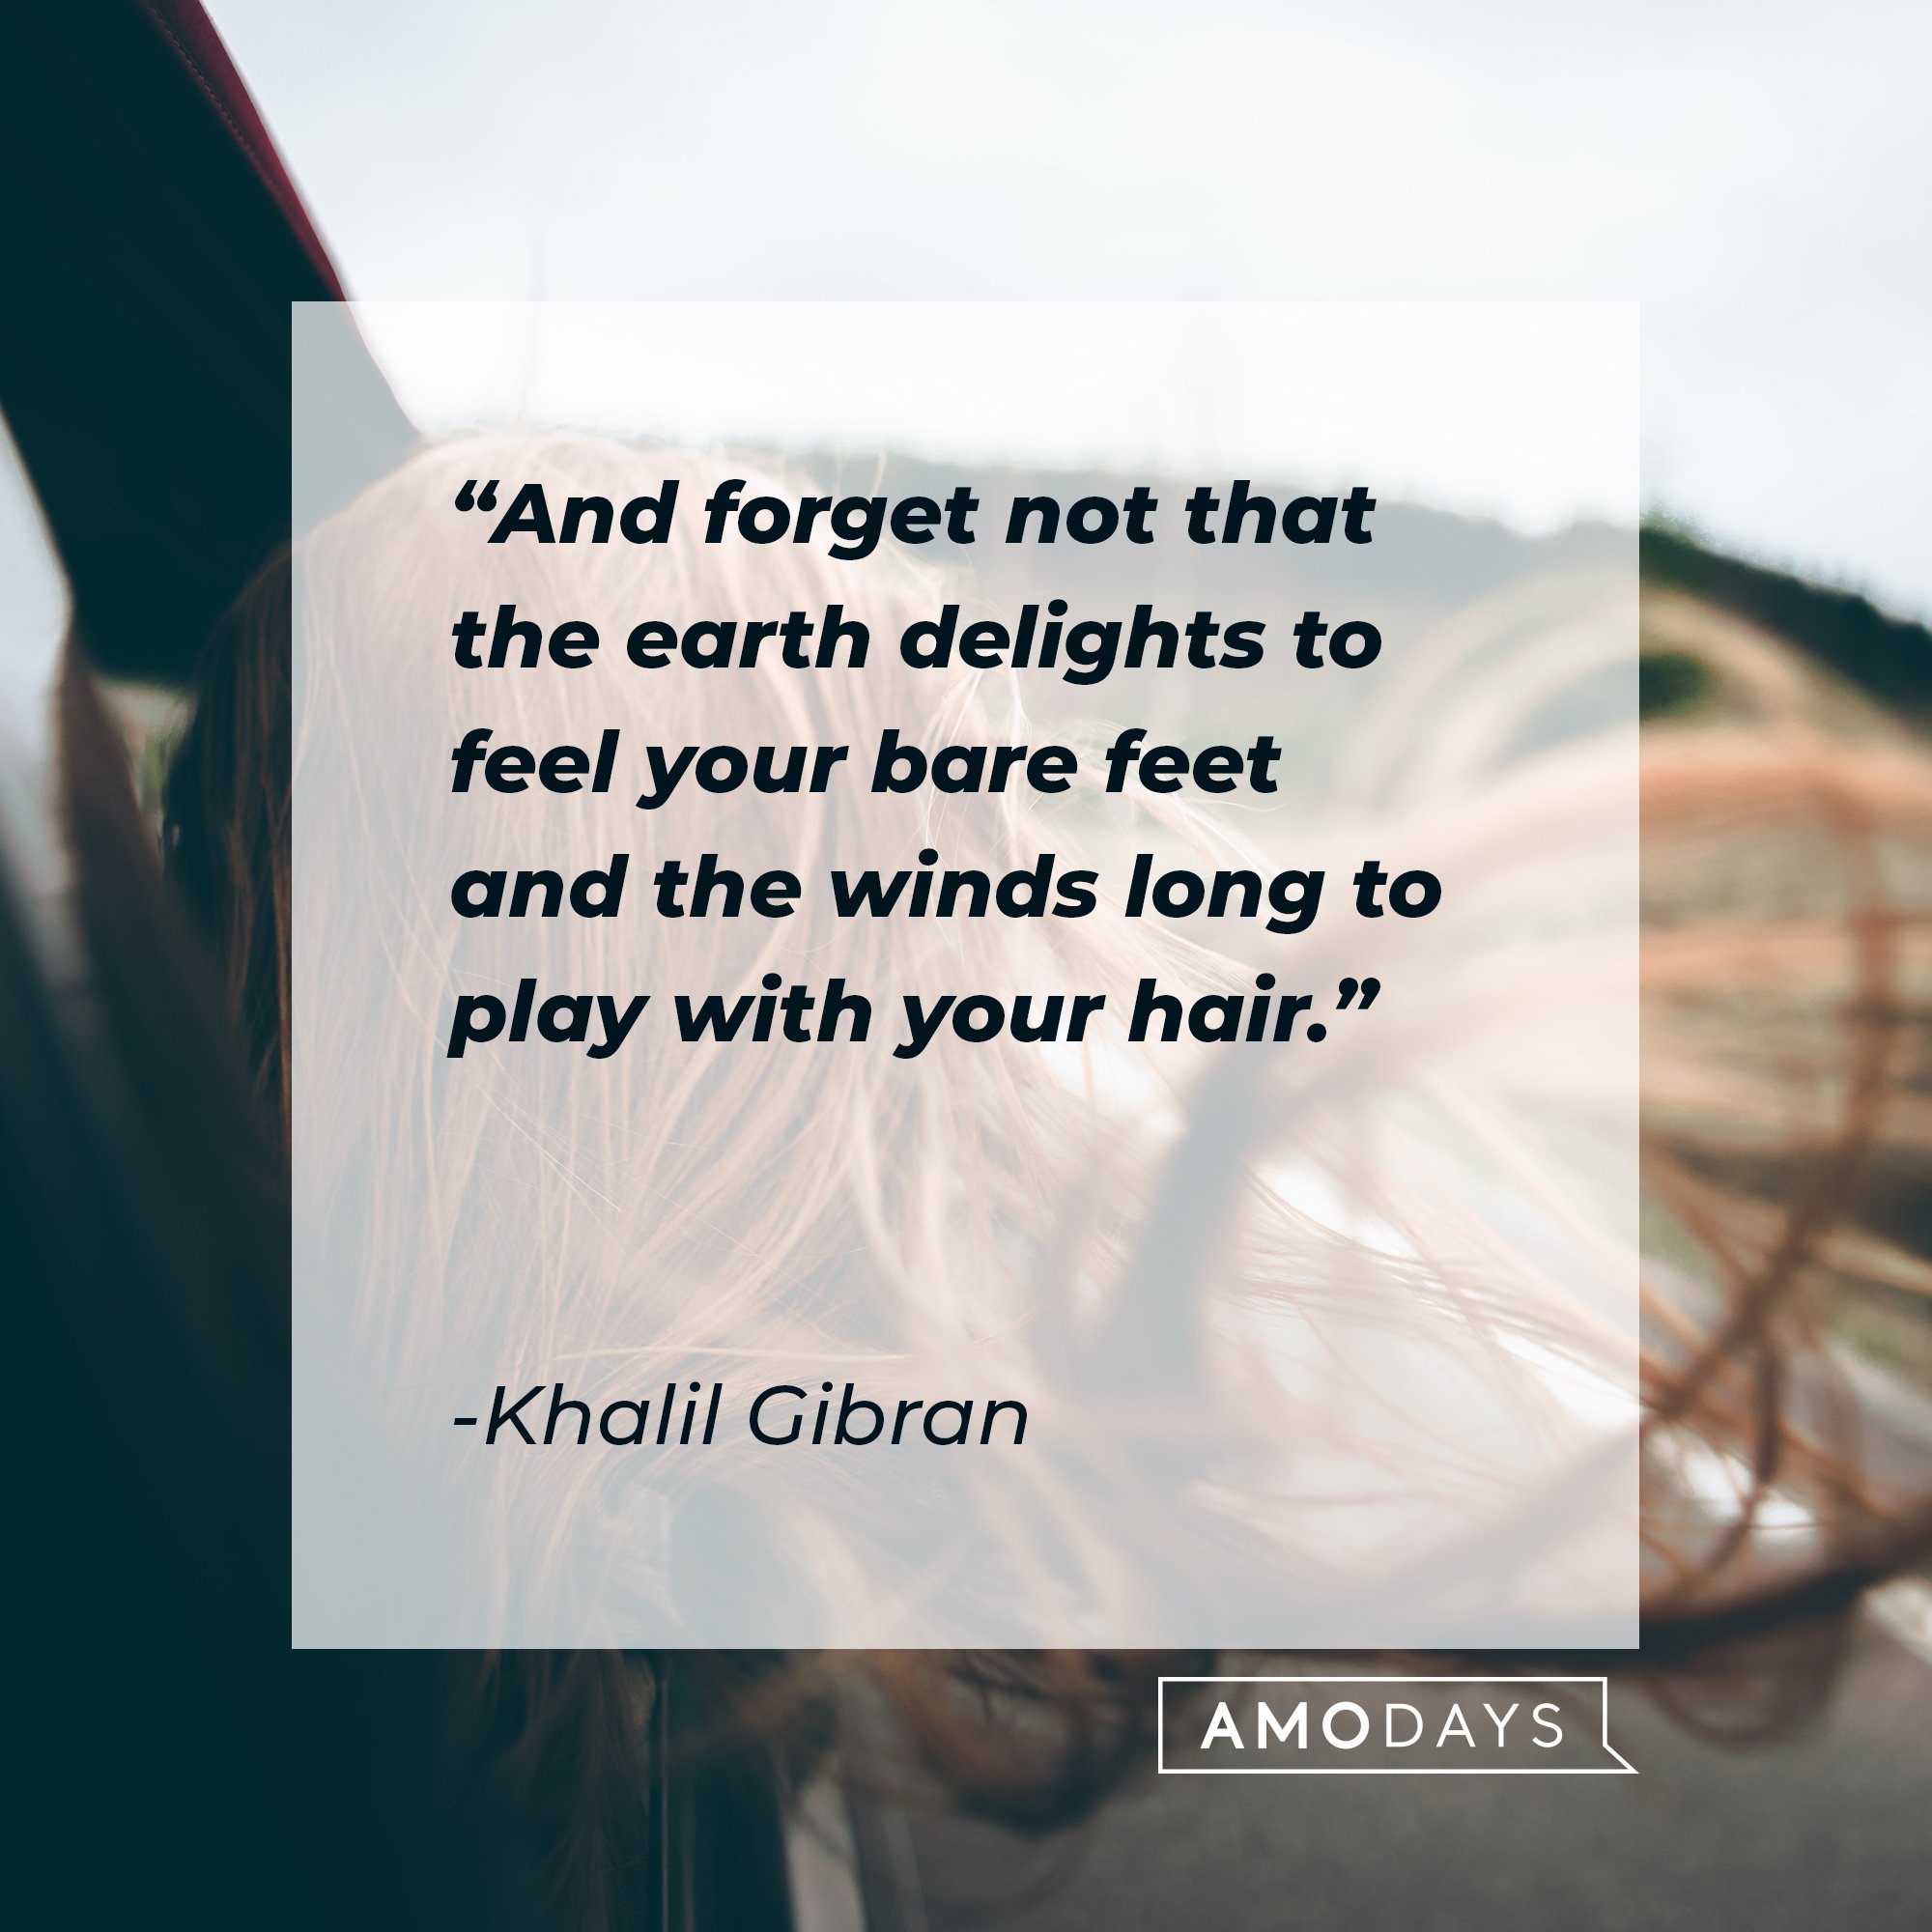 Khalil Gibran's quote: "And forget not that the earth delights to feel your bare feet and the winds long to play with your hair." | Image: AmoDays